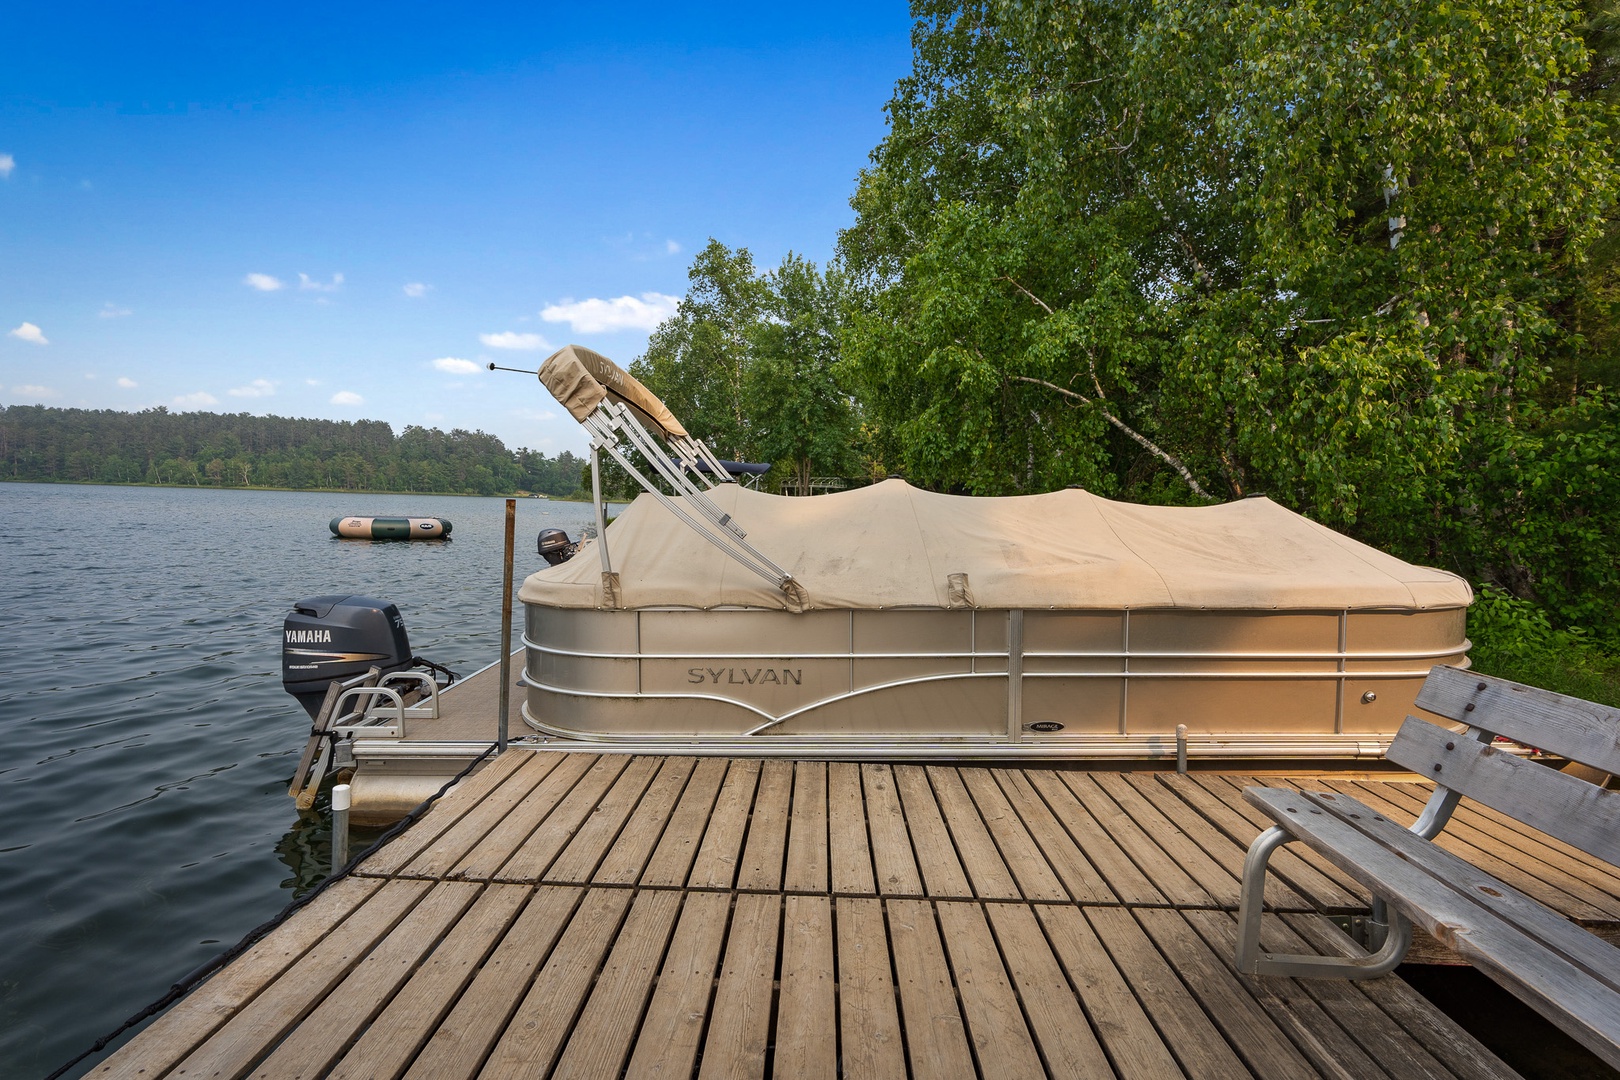 Pontoon available for rent onsite